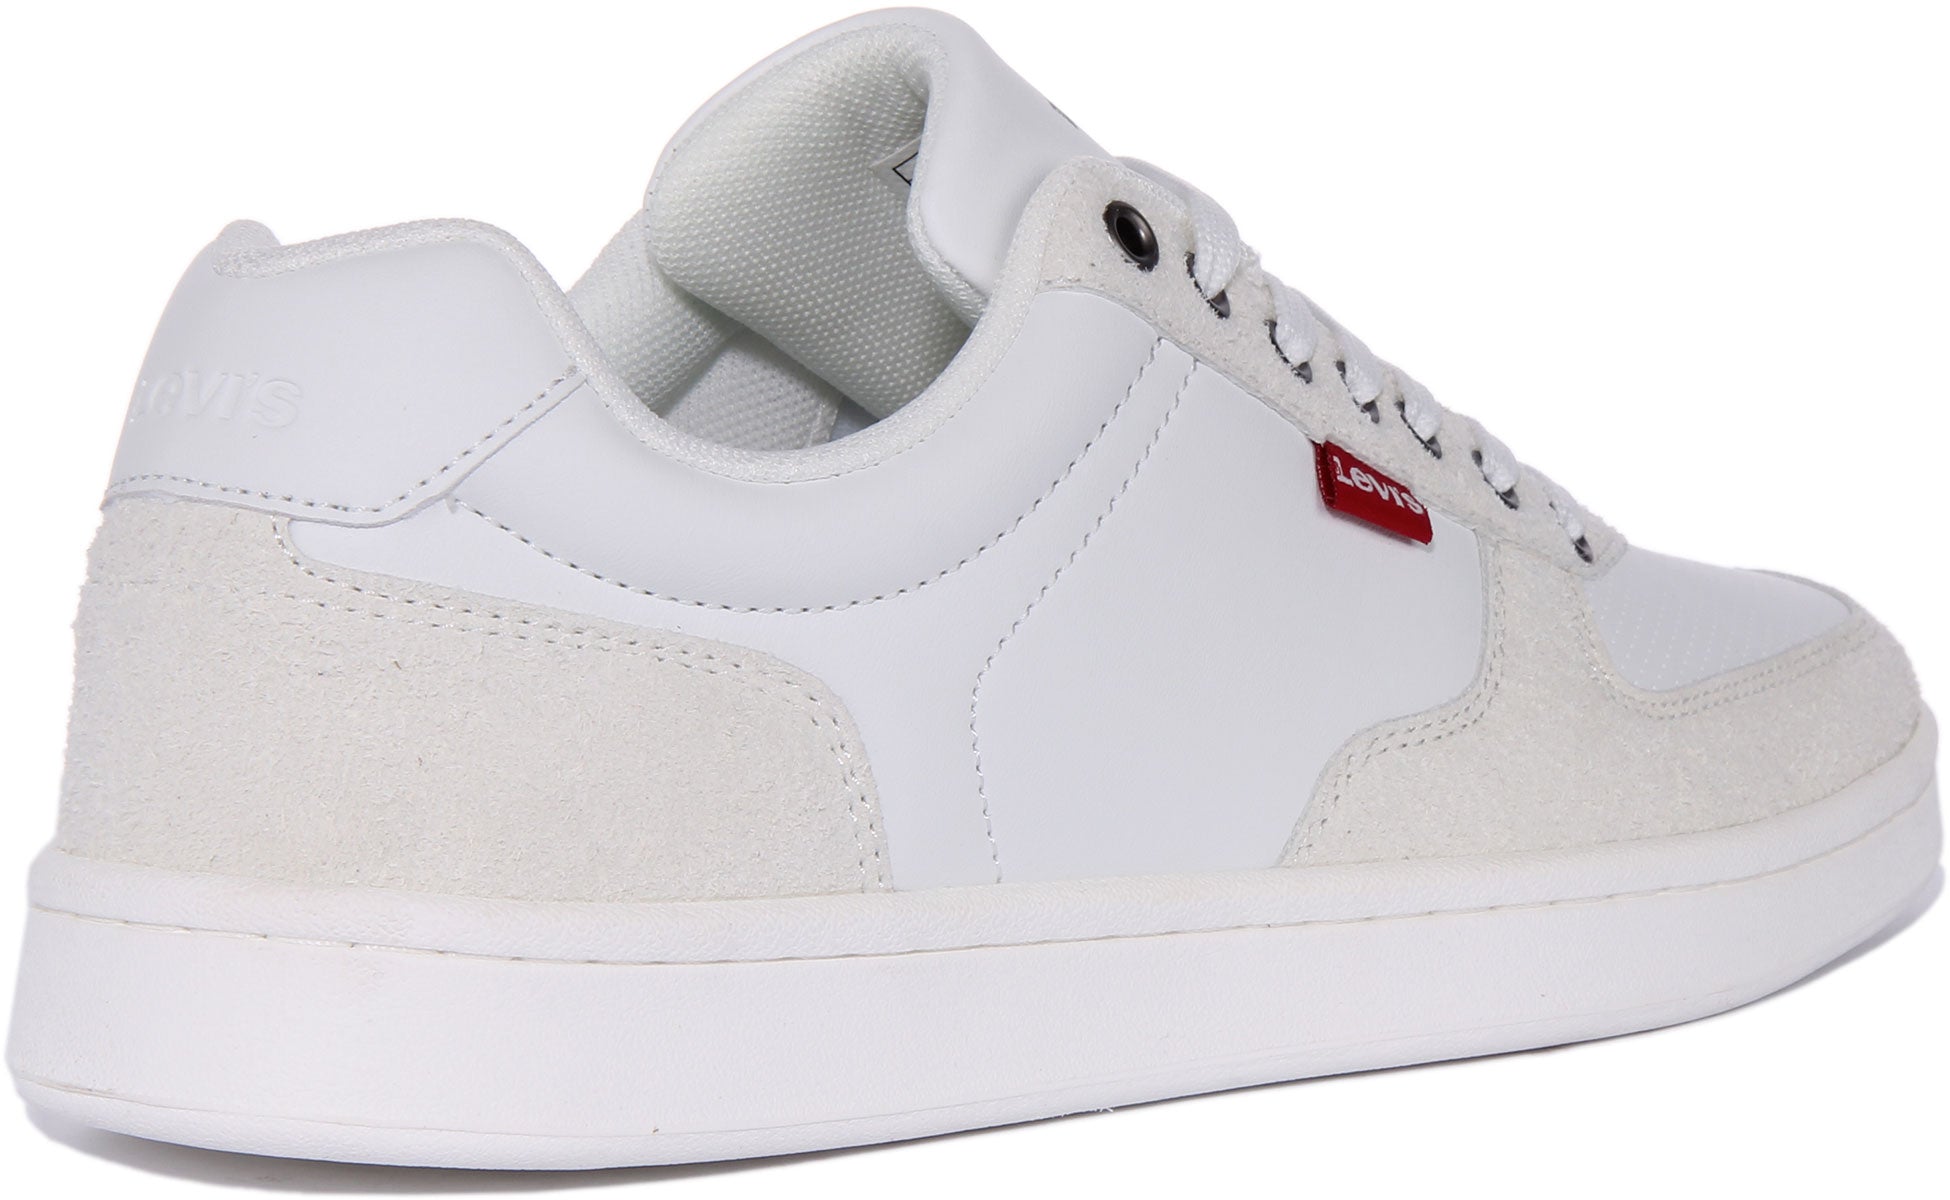 Levi's Levis Mens Ethan S WX Casual Fashion Sneaker Shoe India | Ubuy